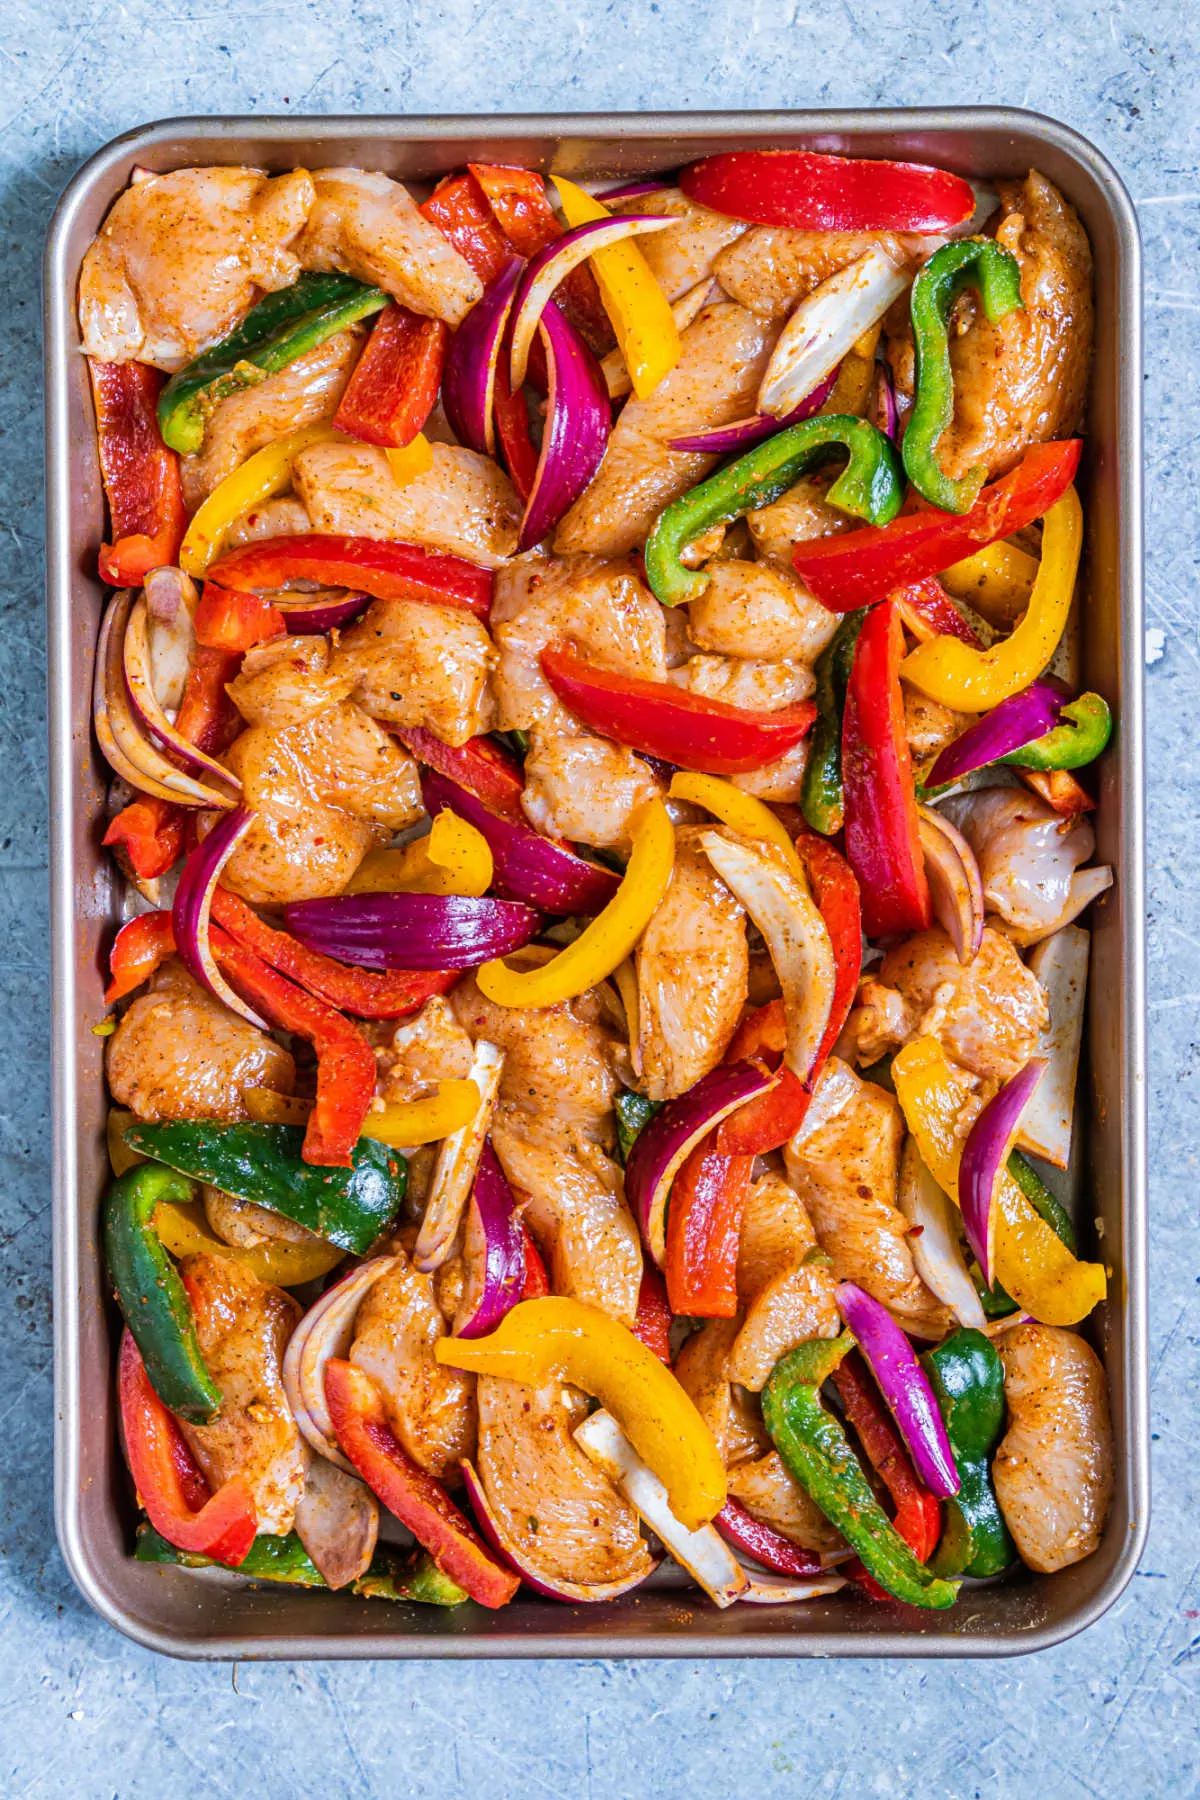 chicken fajita ingredients tossed with oil and seasoning, ready to bake.